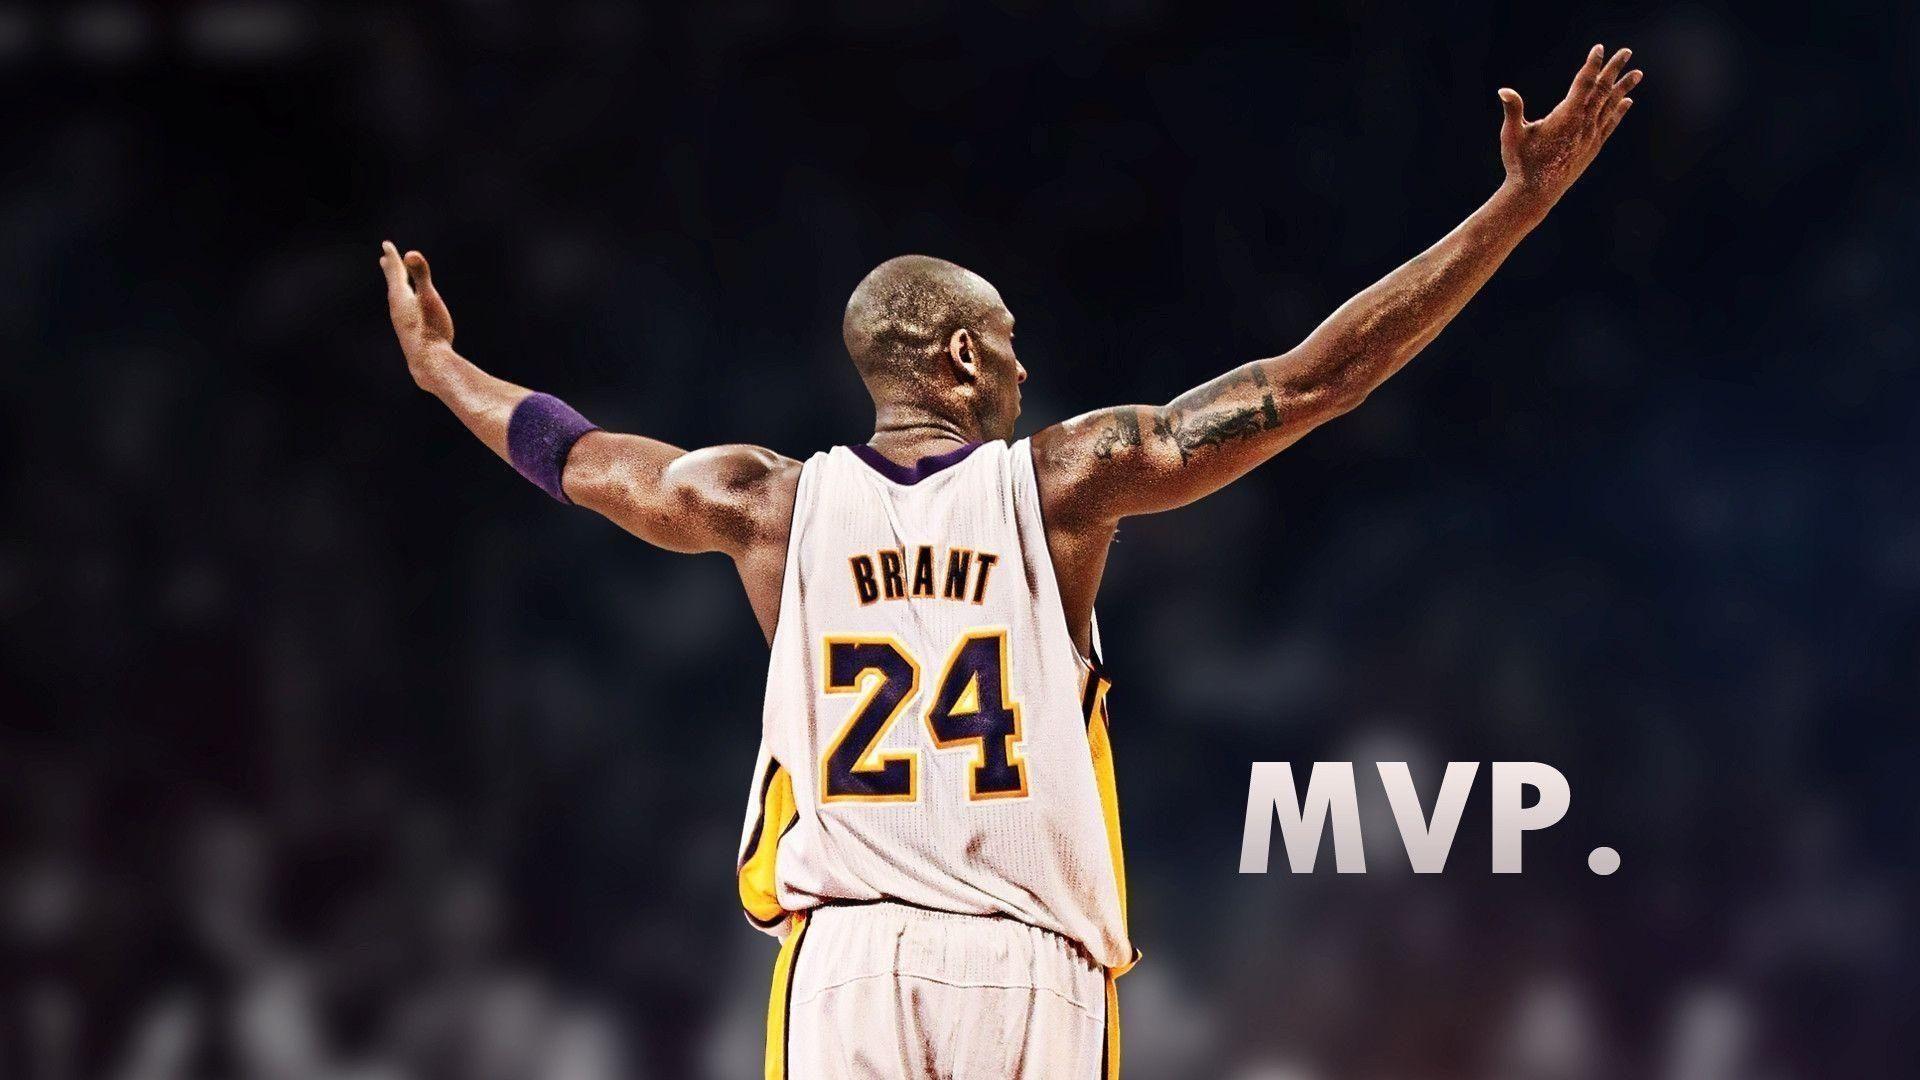 Kobe Bryant Wallpaper 2015 with image resolution 1920x1080 pixel. You can use this wallpaper as background for your desktop Computer Screensavers, Android or iPhone smartphones - Kobe Bryant